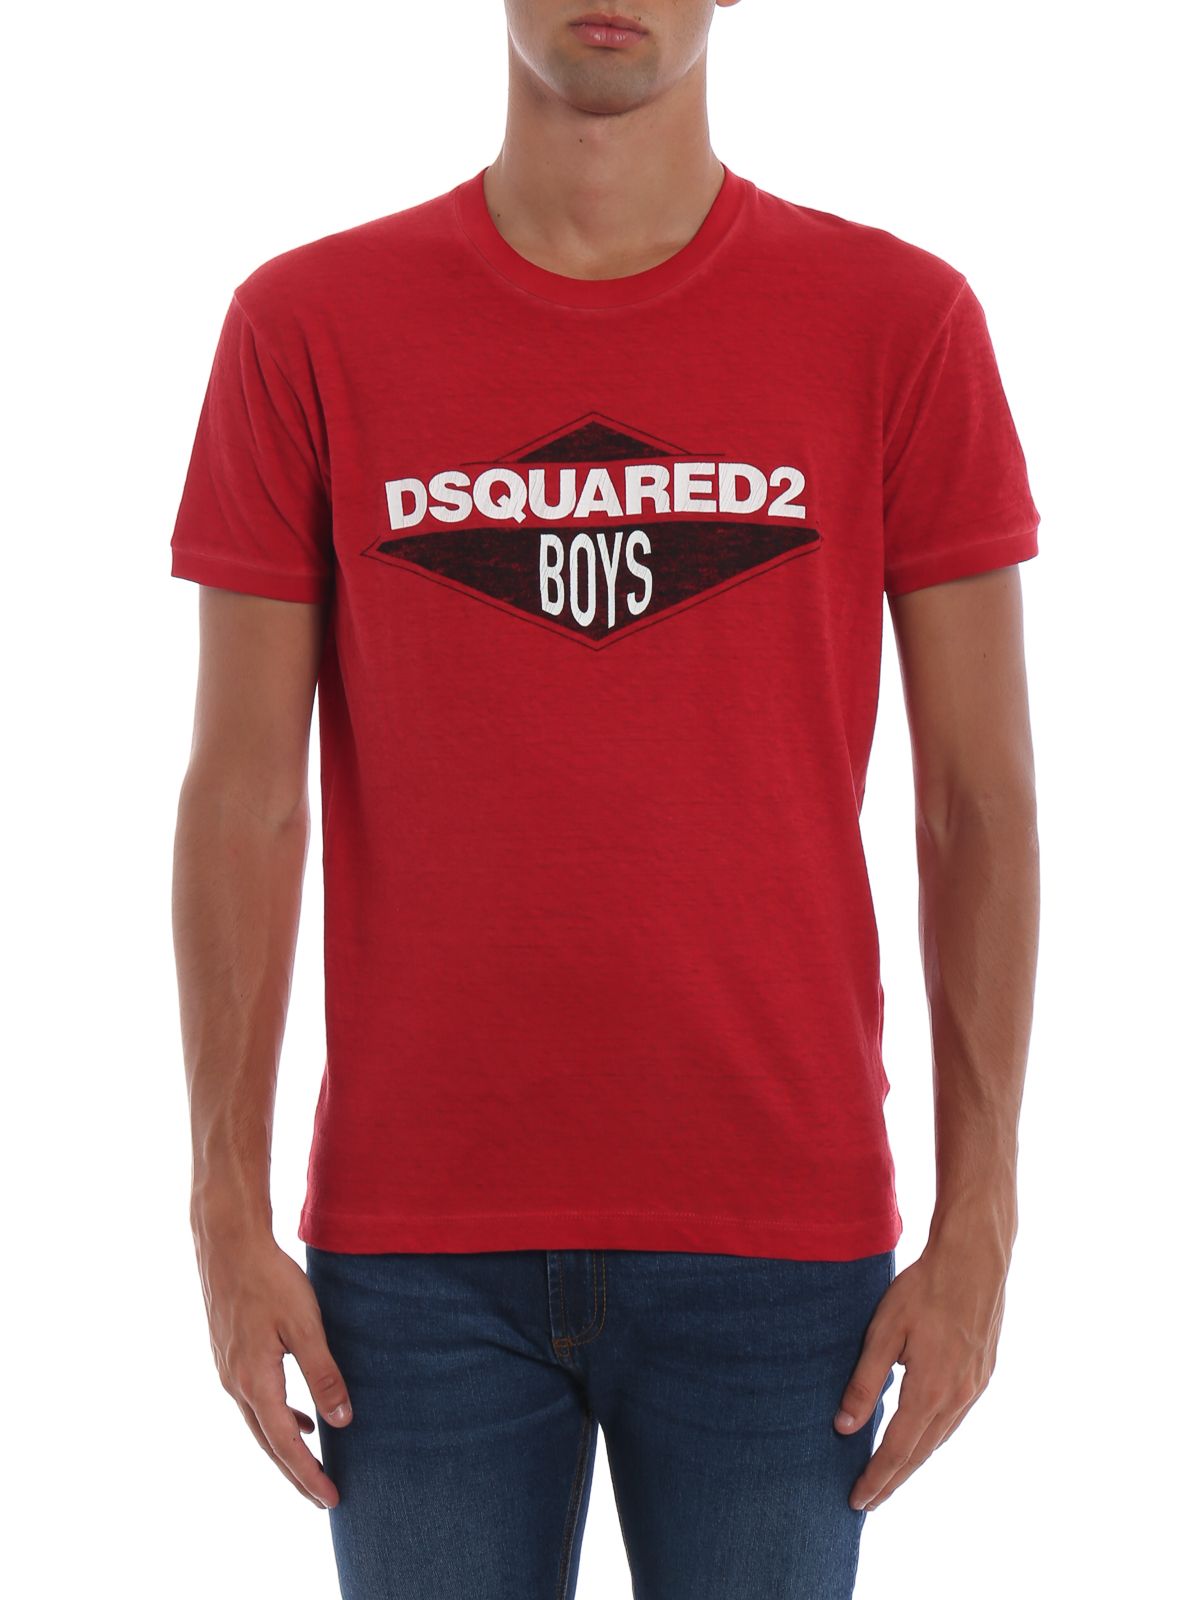 dsquared2 t shirt red writing